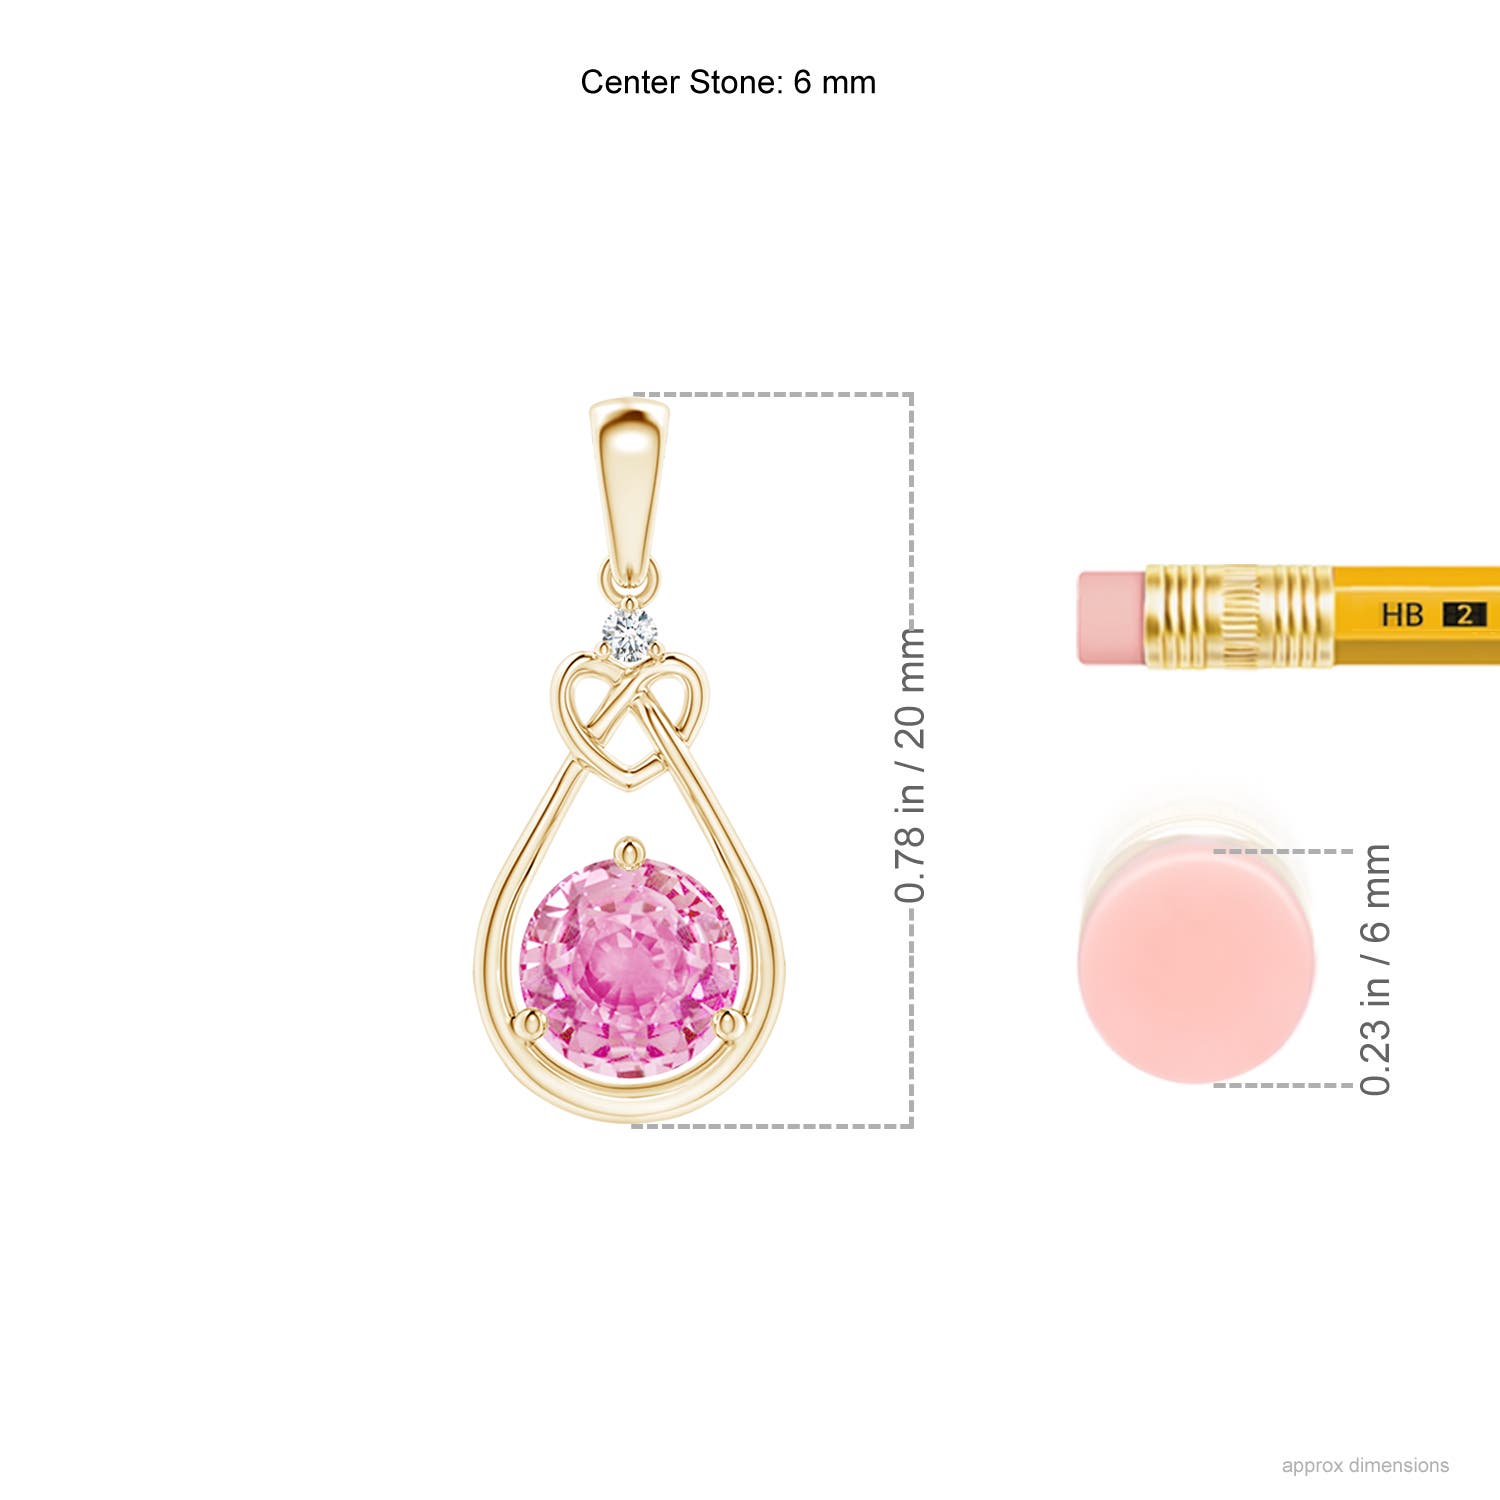 A - Pink Sapphire / 1.01 CT / 14 KT Yellow Gold